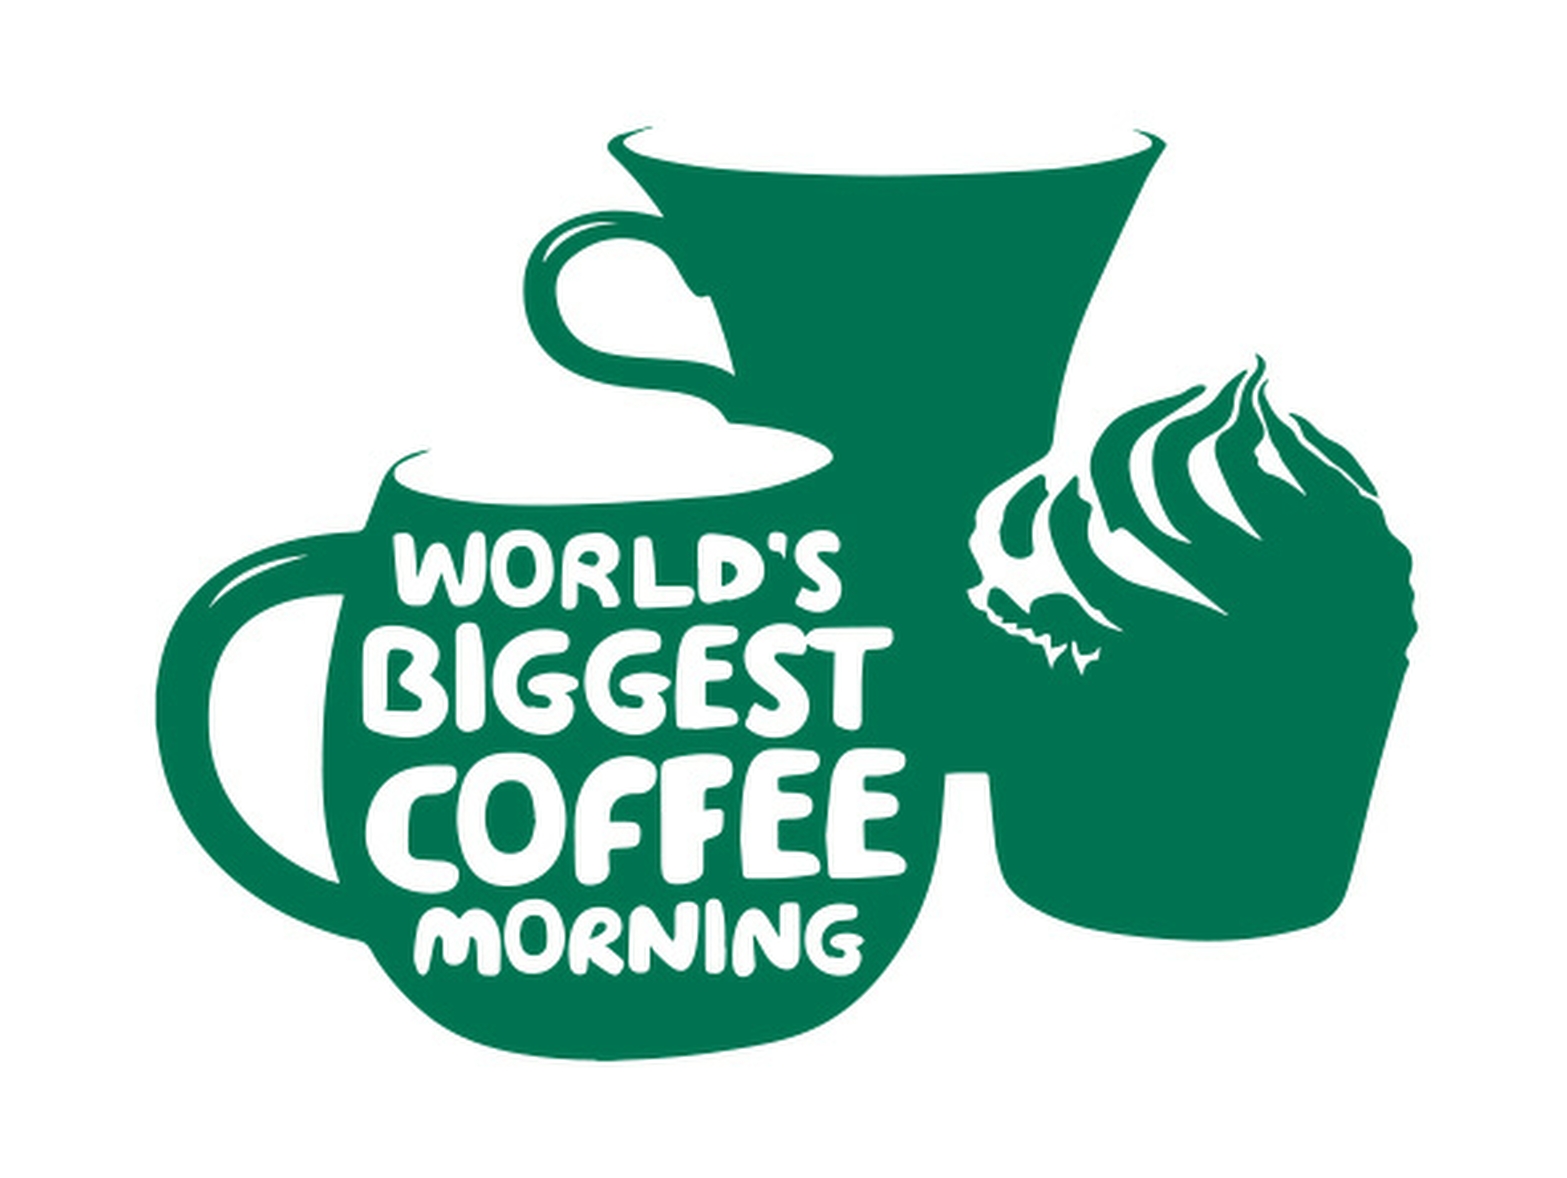 Support your local Macmillan Coffee Morning